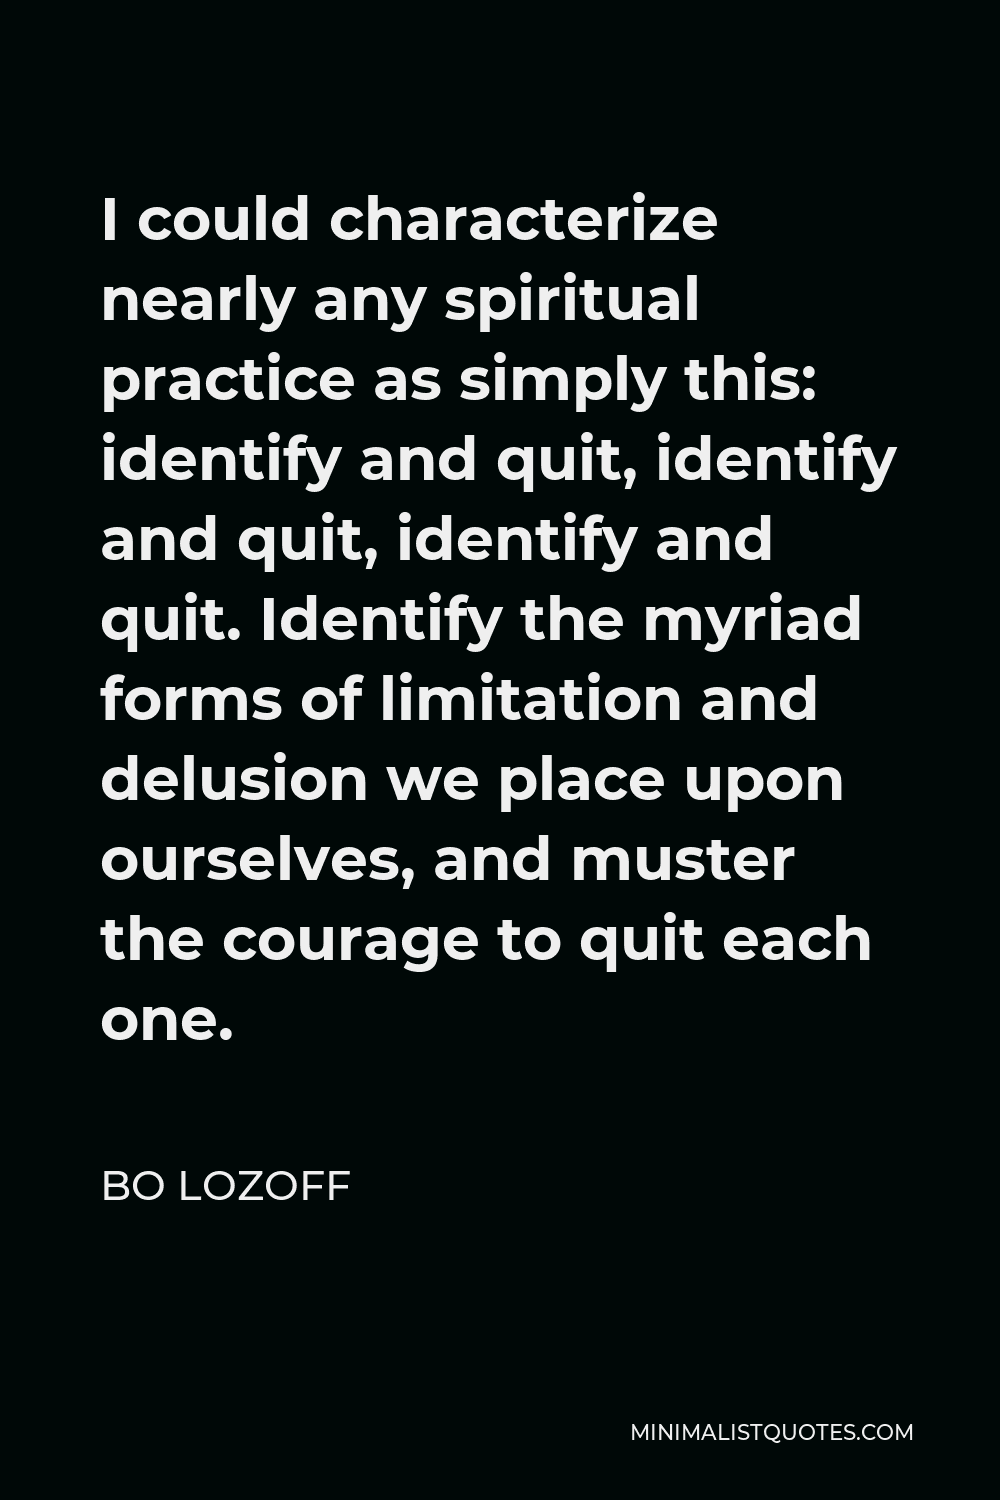 Bo Lozoff Quote - I could characterize nearly any spiritual practice as simply this: identify and quit, identify and quit, identify and quit. Identify the myriad forms of limitation and delusion we place upon ourselves, and muster the courage to quit each one.